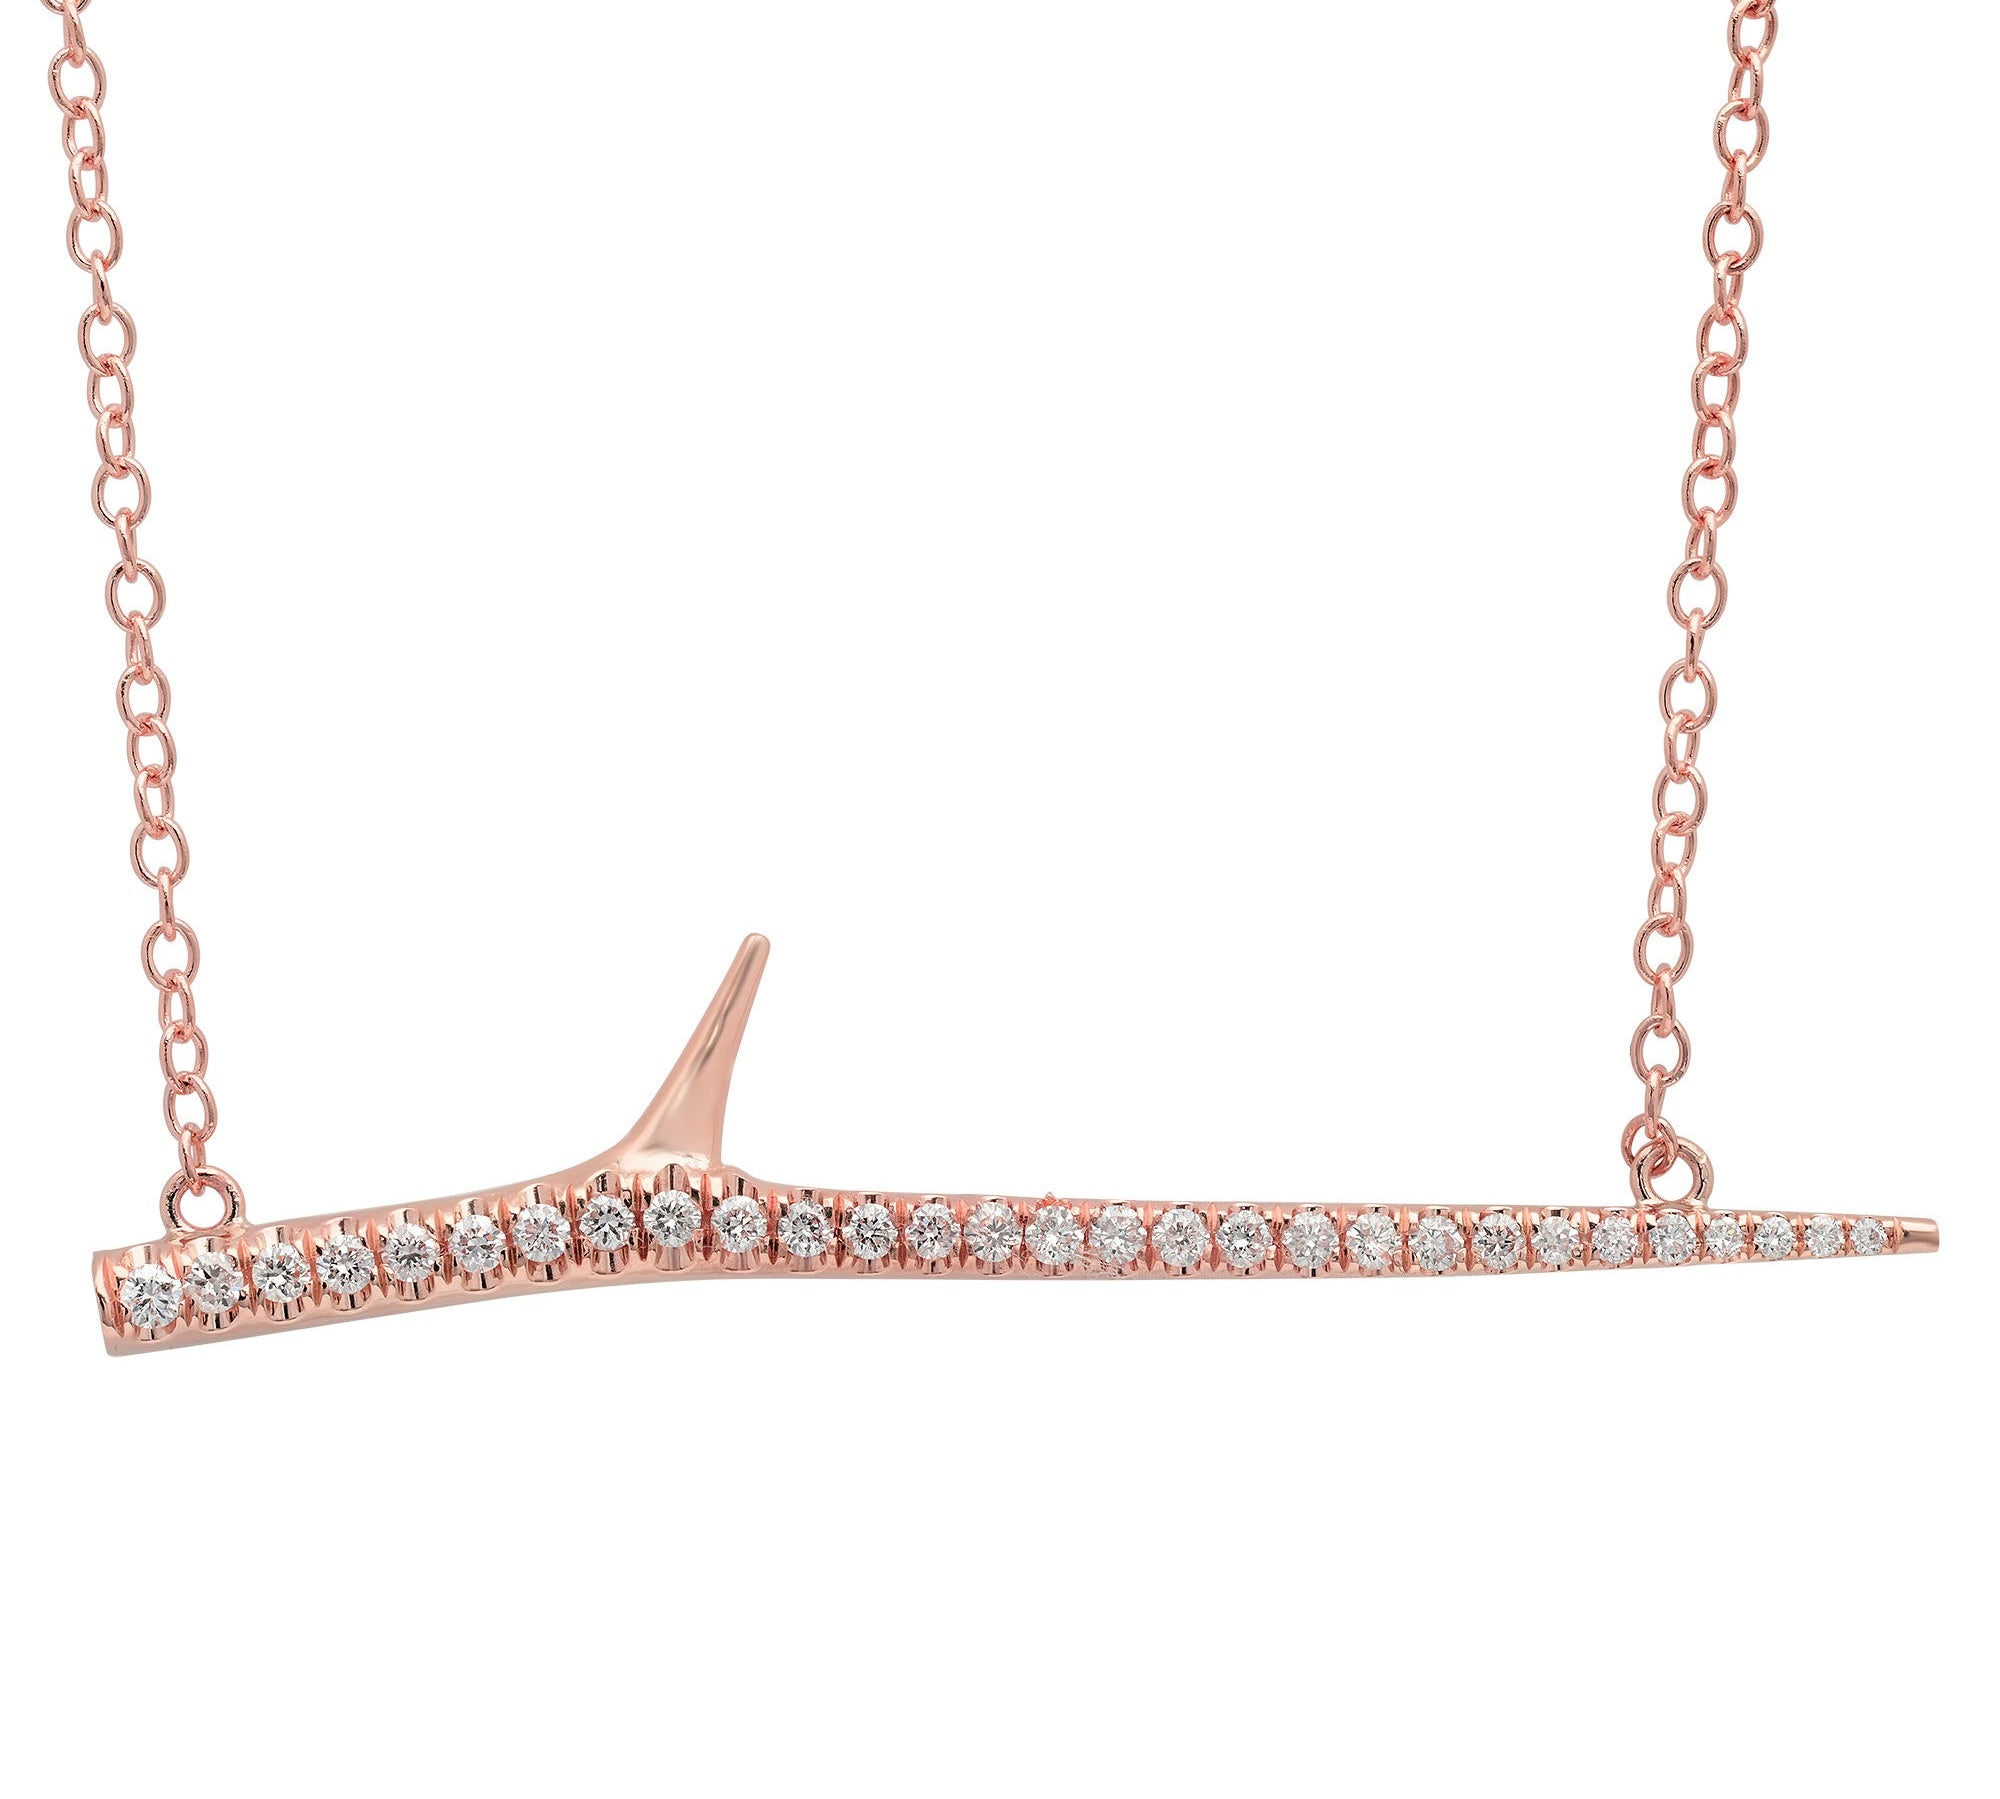 Horizontal Thorn Necklace Pendant Elisabeth Bell Jewelry Rose Gold  